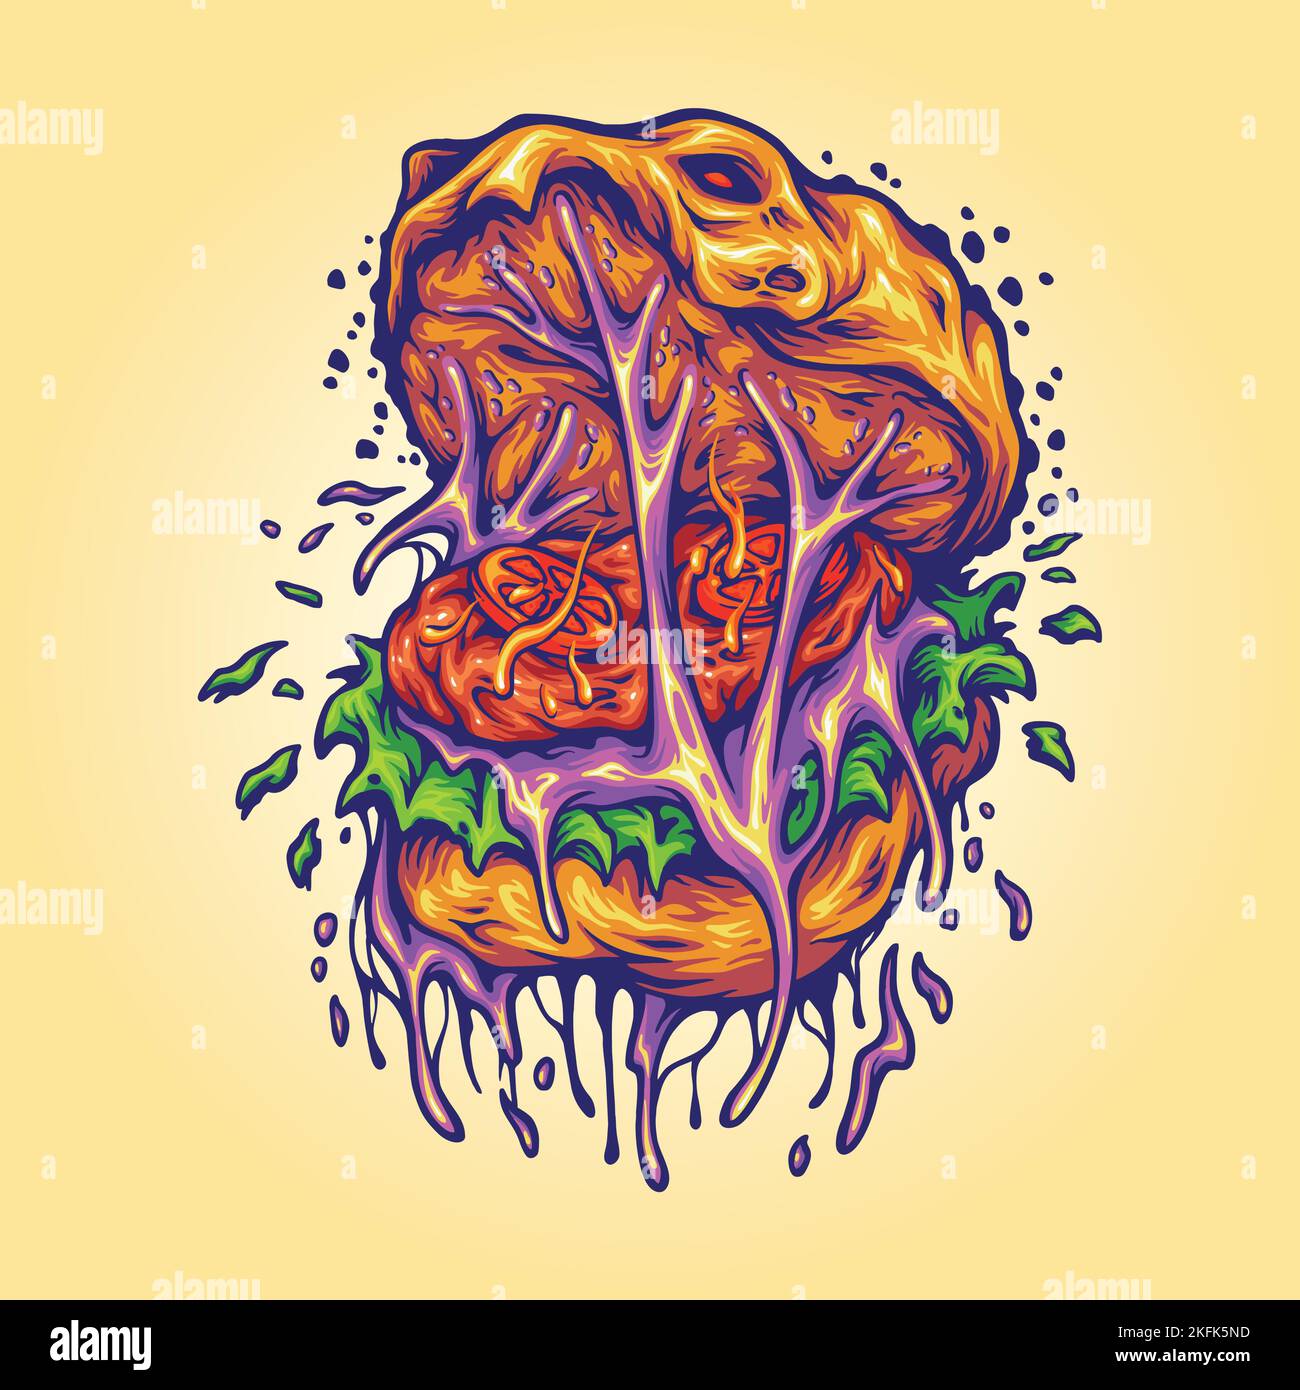 Scary delicious burger melting illustration vector illustrations for your work logo, merchandise t-shirt, stickers and label designs, poster Stock Vector